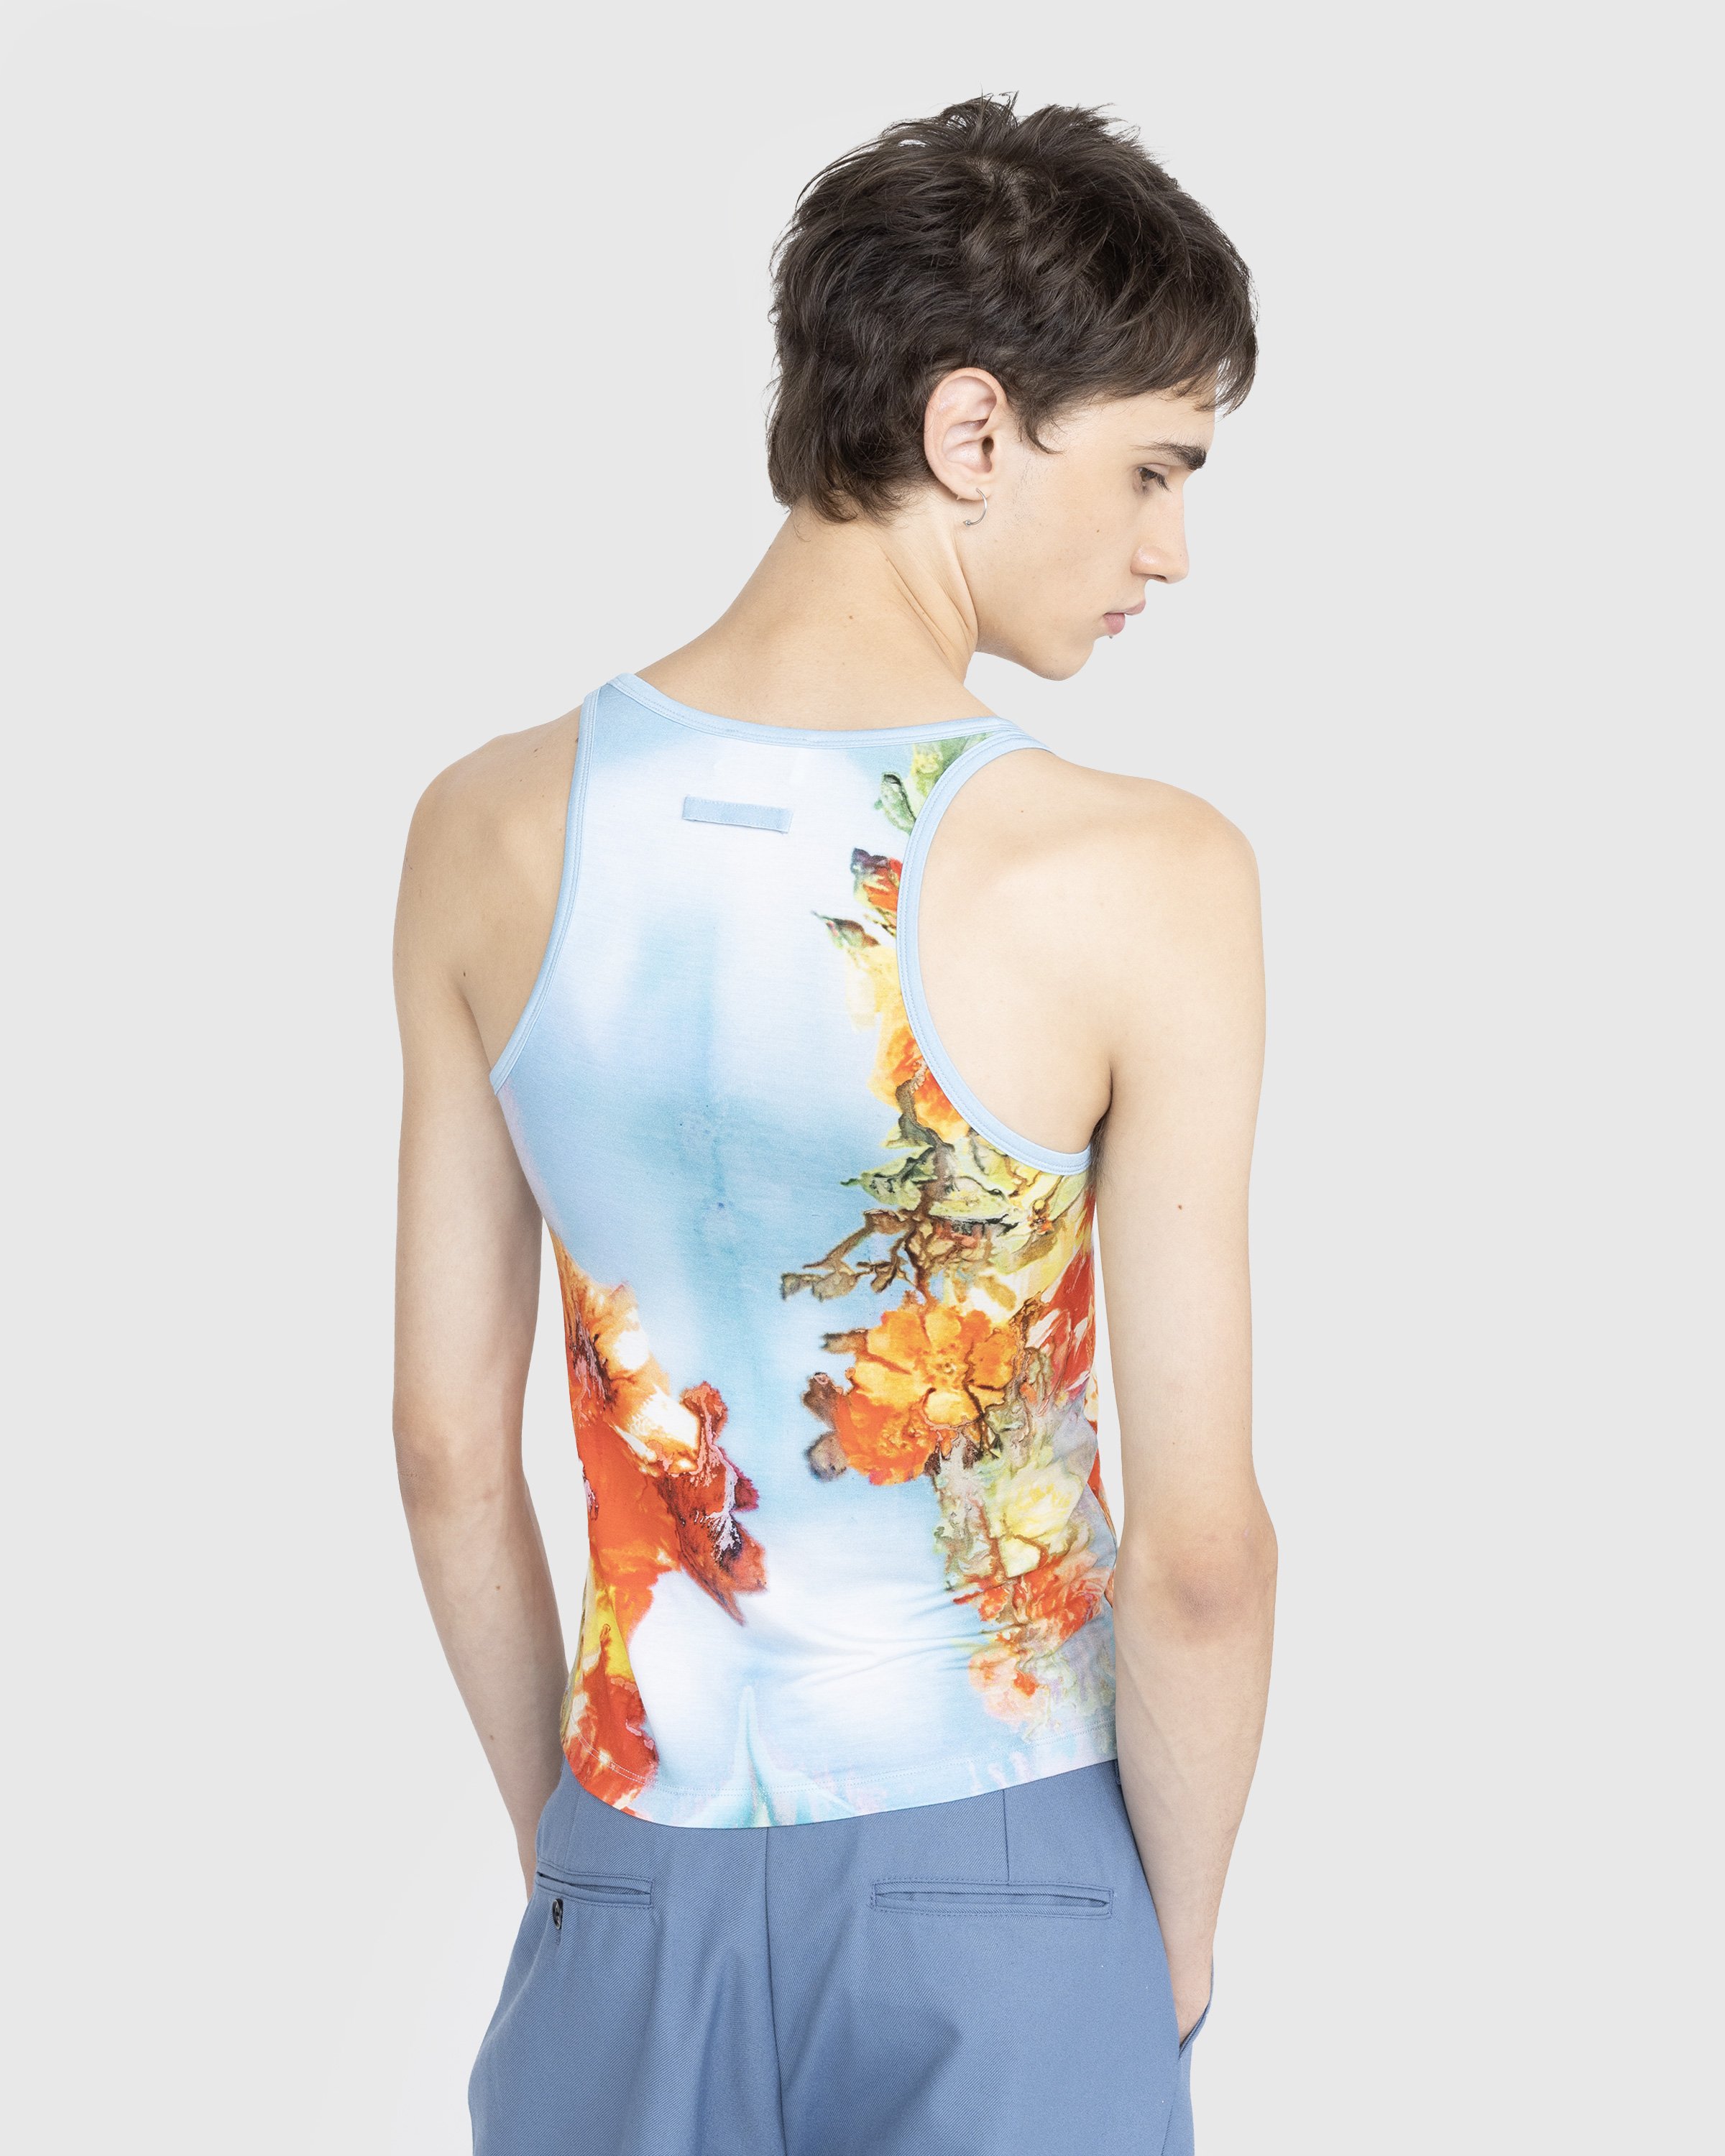 Jean Paul Gaultier - Printed Body Flowers Tank Top Blue - Clothing - Blue - Image 3